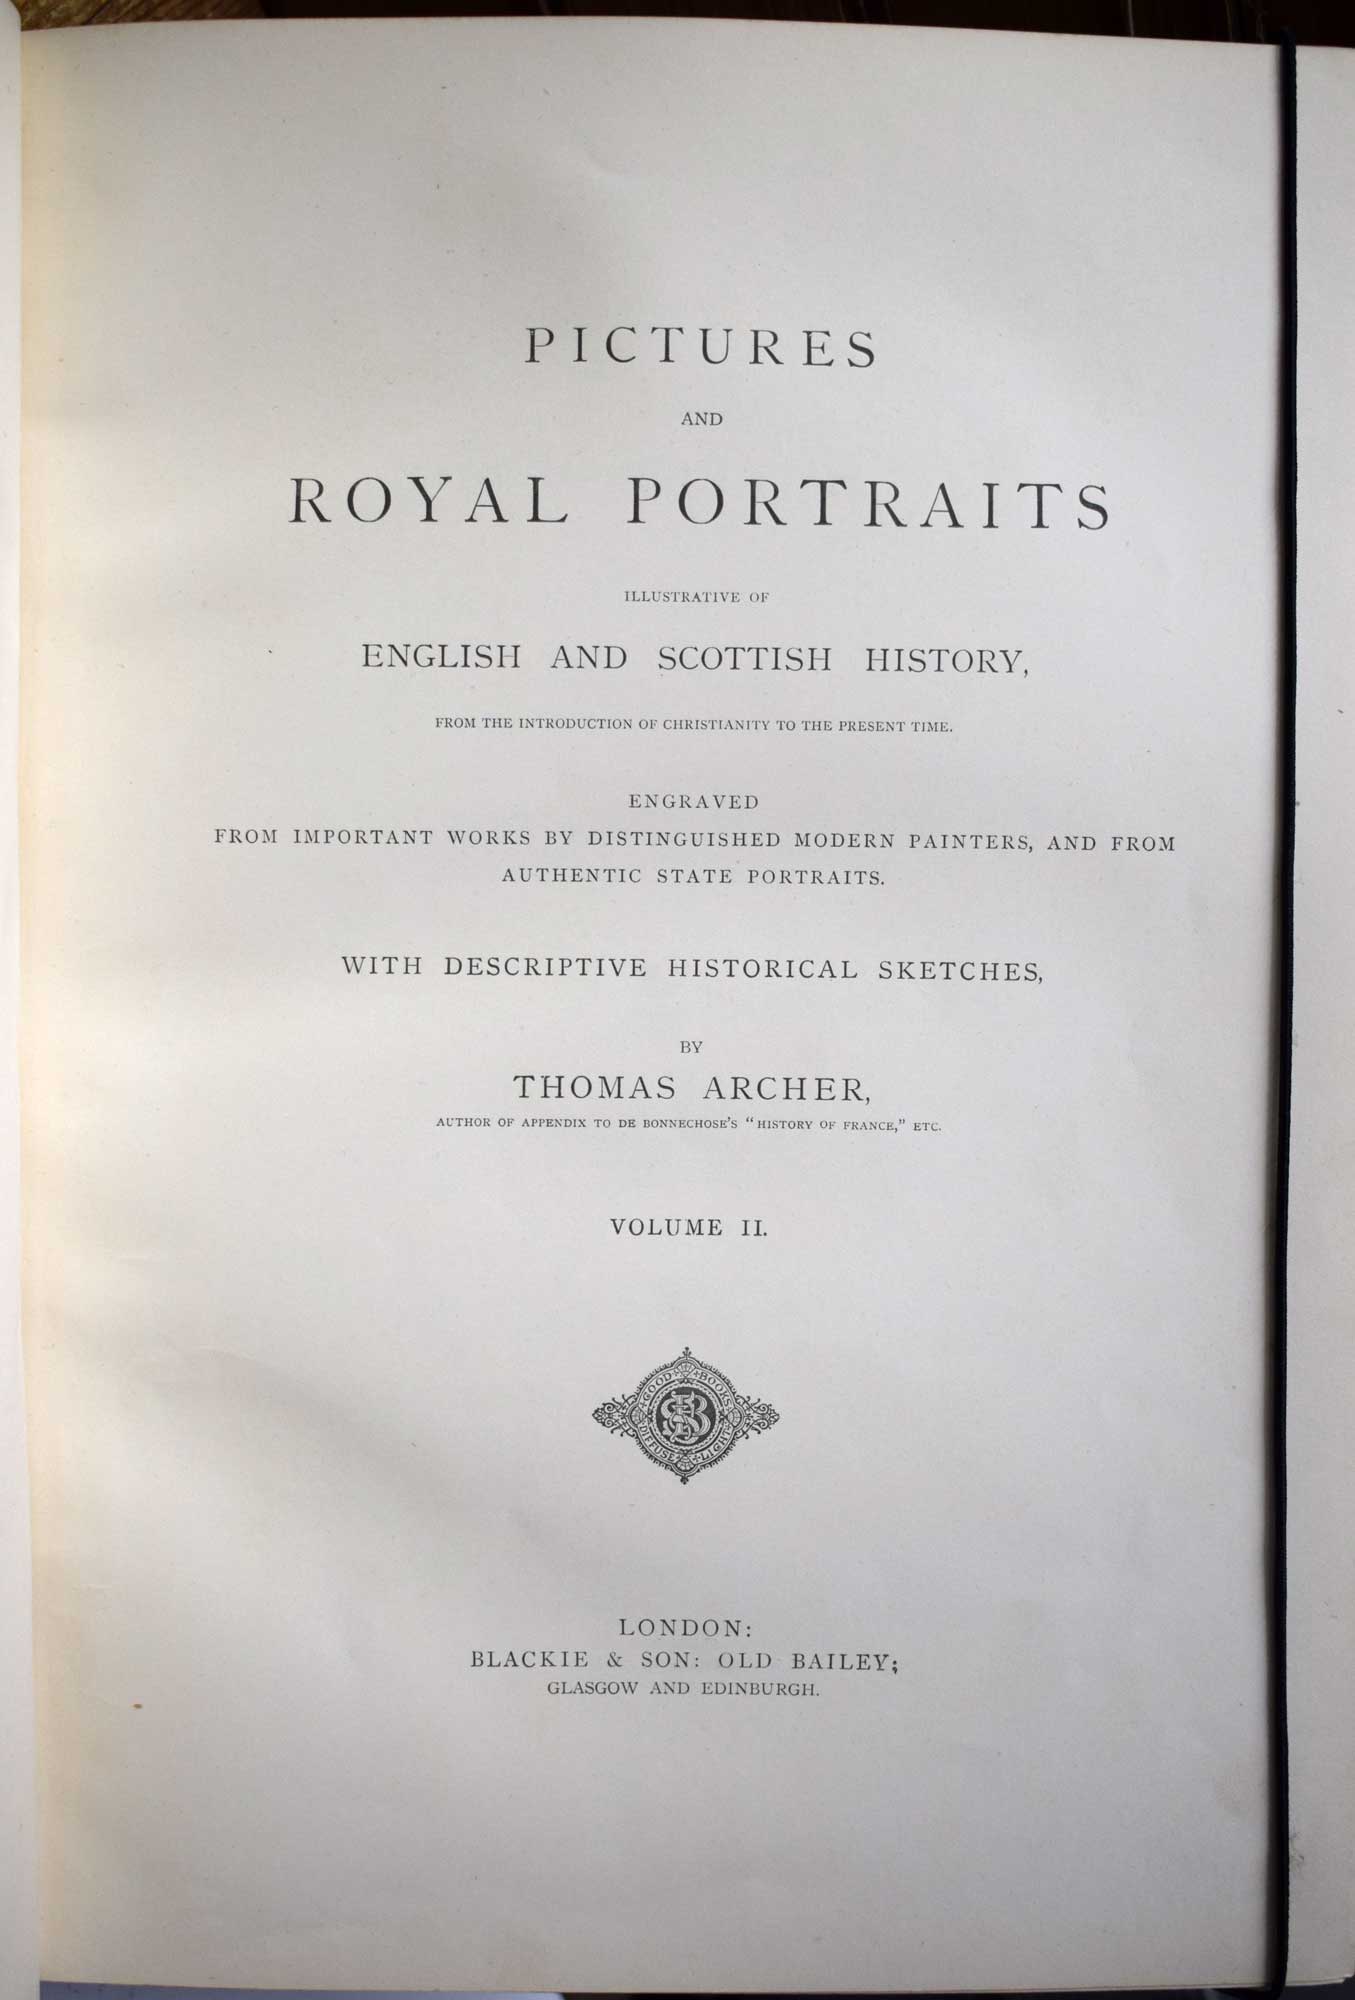 Pictures and Royal Portraits Illustrative of English and Scottish History From the Introduction of Christianity to the Present Time With descriptive Historical Sketches. Volume 2 only.